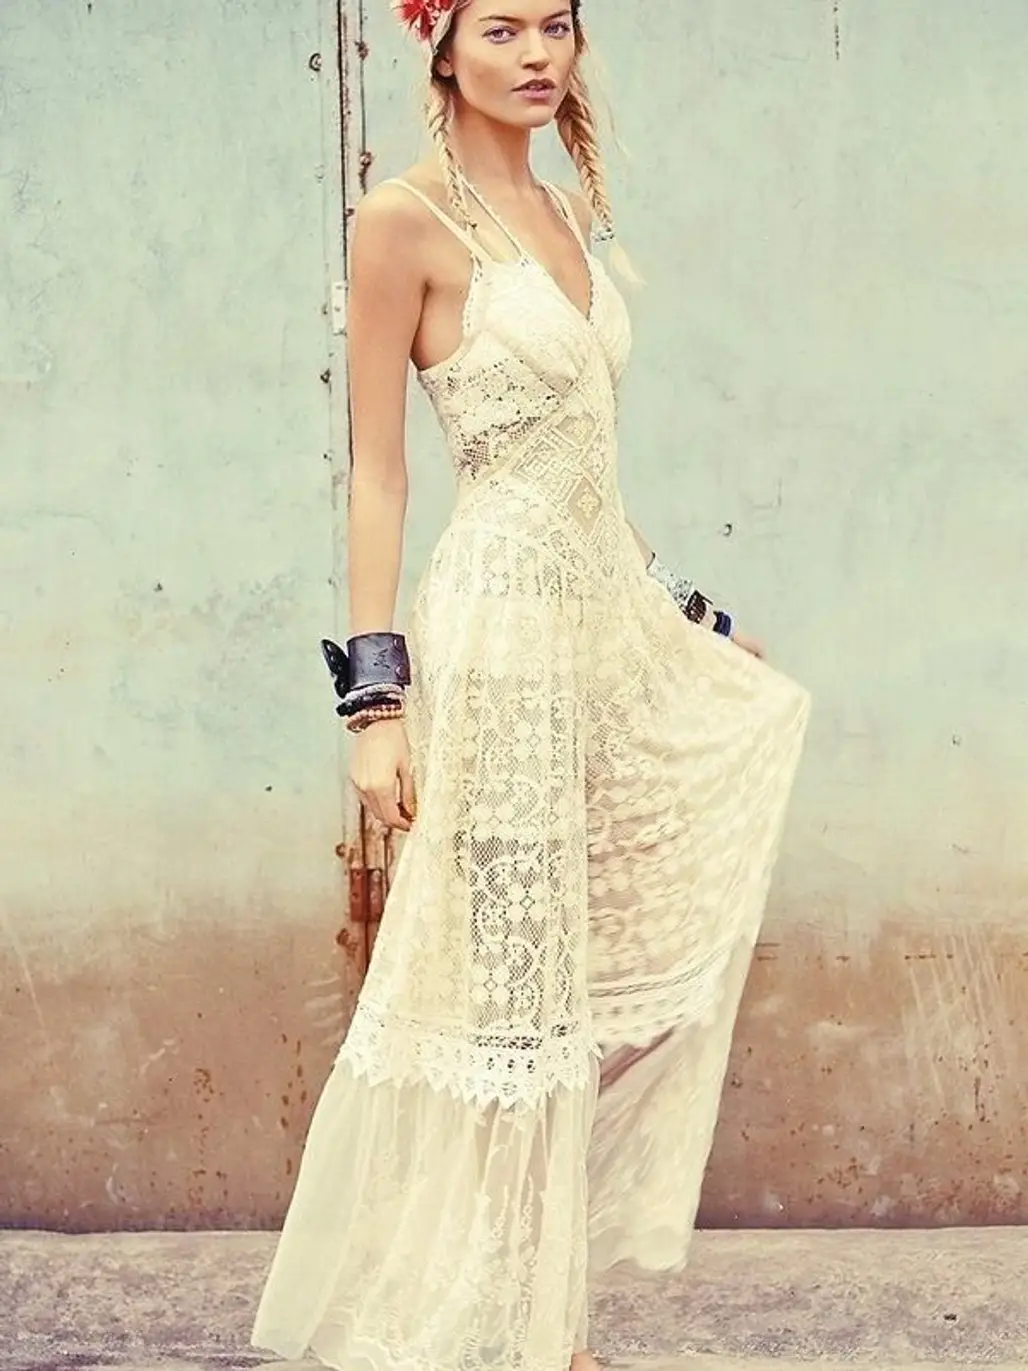 Add an Awesome Lacy Sundress to Your Wardrobe for Any Season